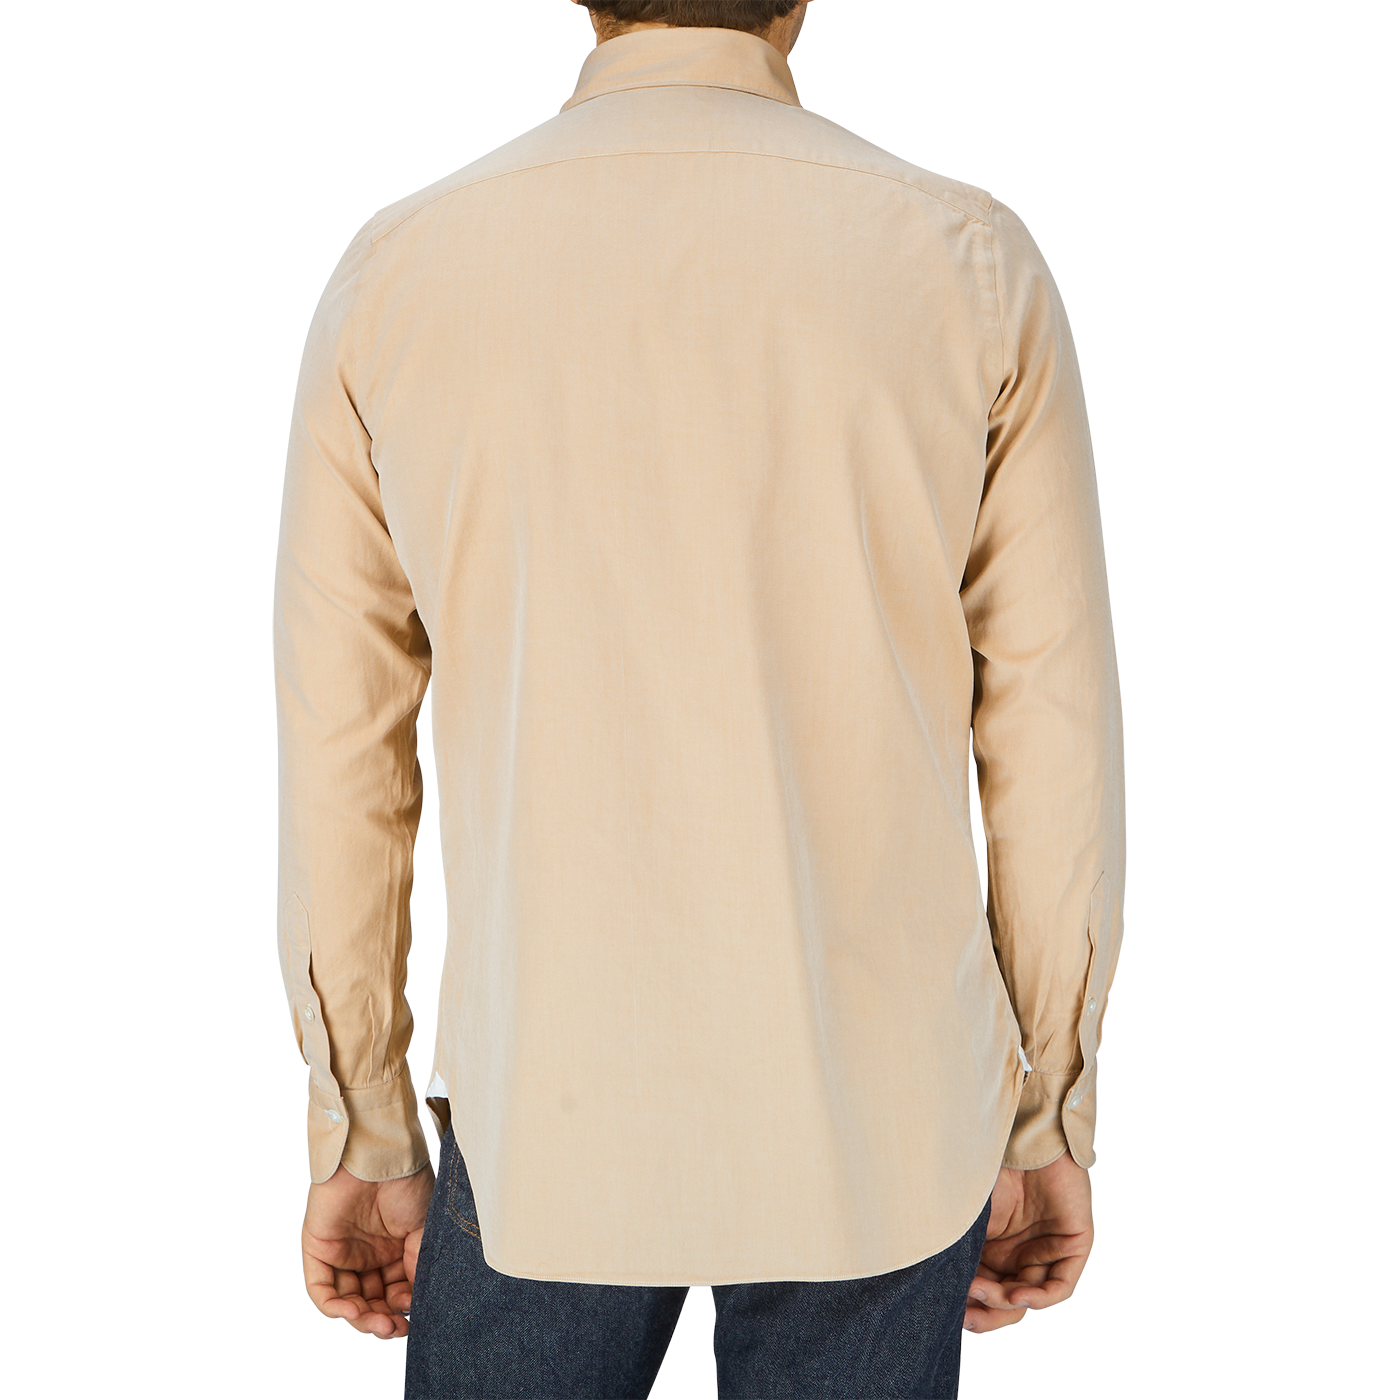 A man in a Sand Beige Washed Cotton Twill shirt, likely a Finamore handmade shirt, seen from behind.